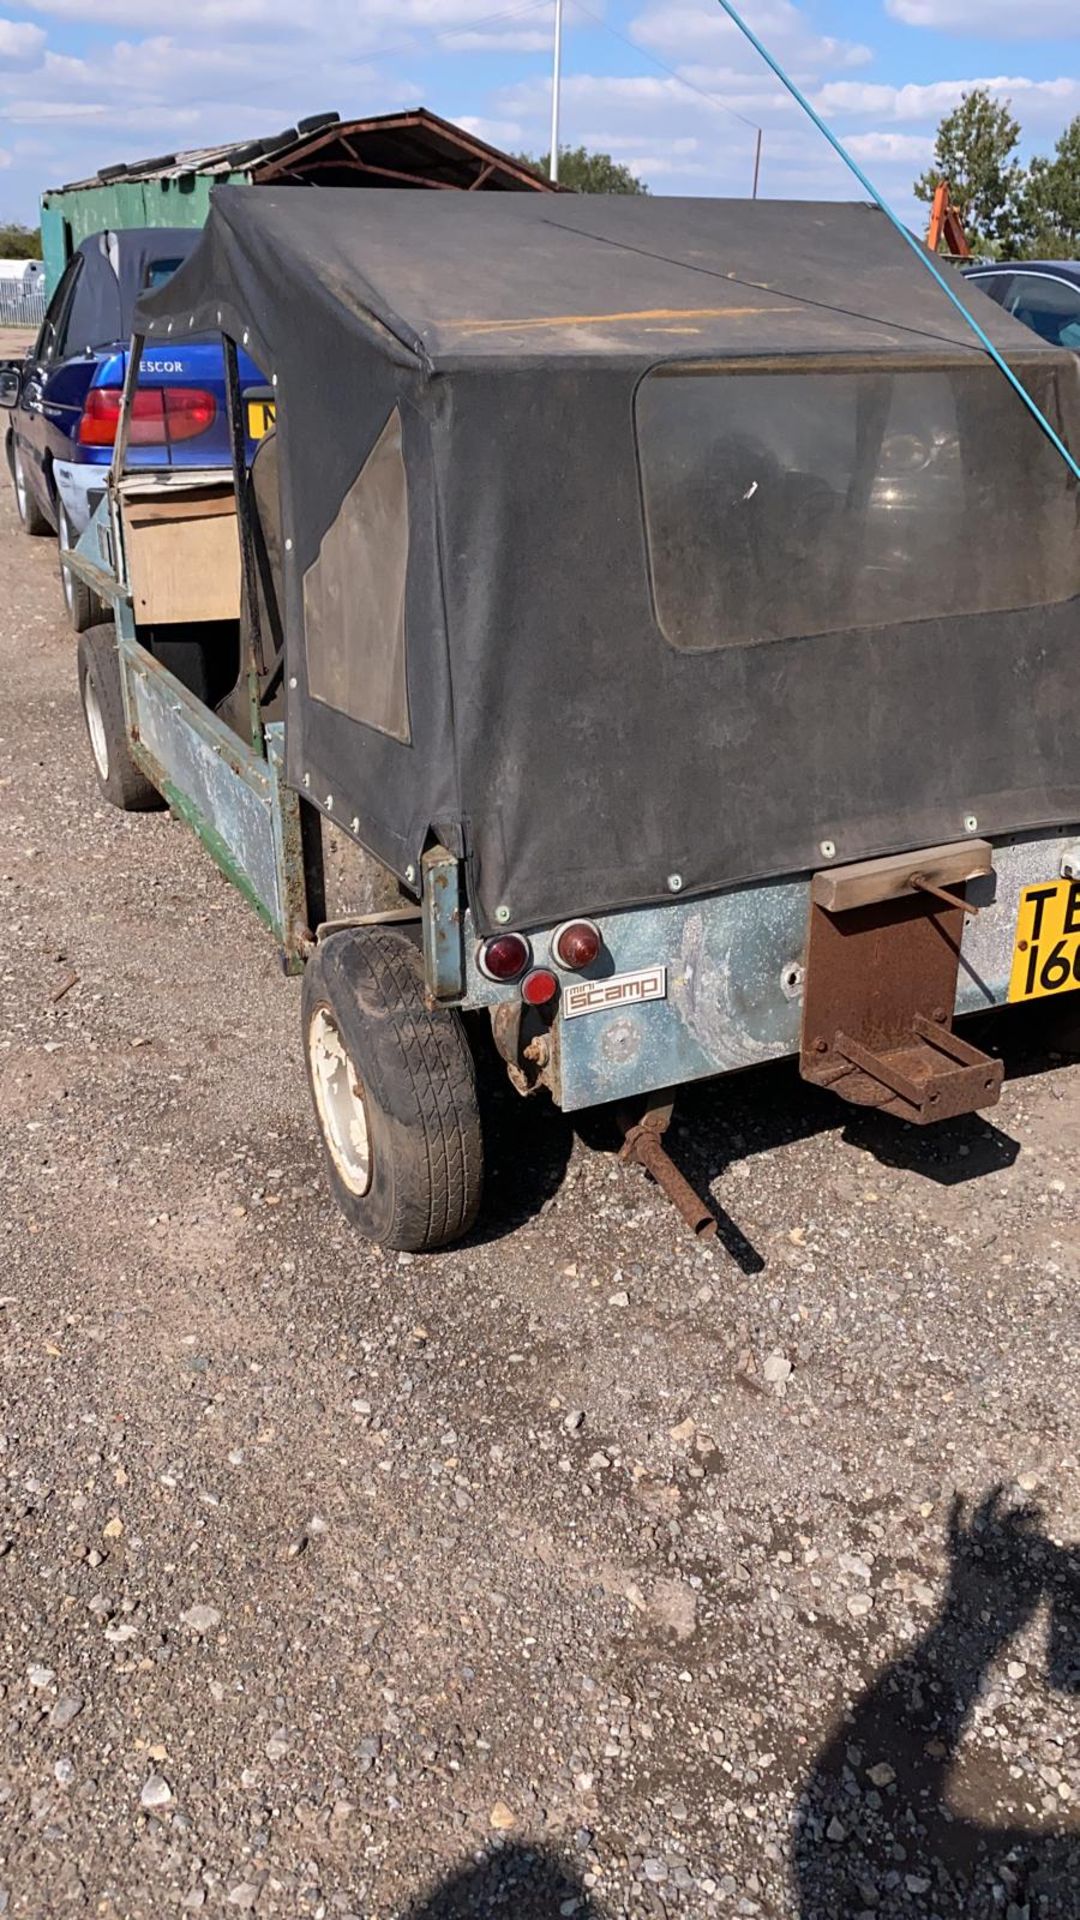 1977 MINISCAMP BUGGY 998CC PETROL SILVER, V5 PRESENT - BARN FIND! - Image 14 of 17